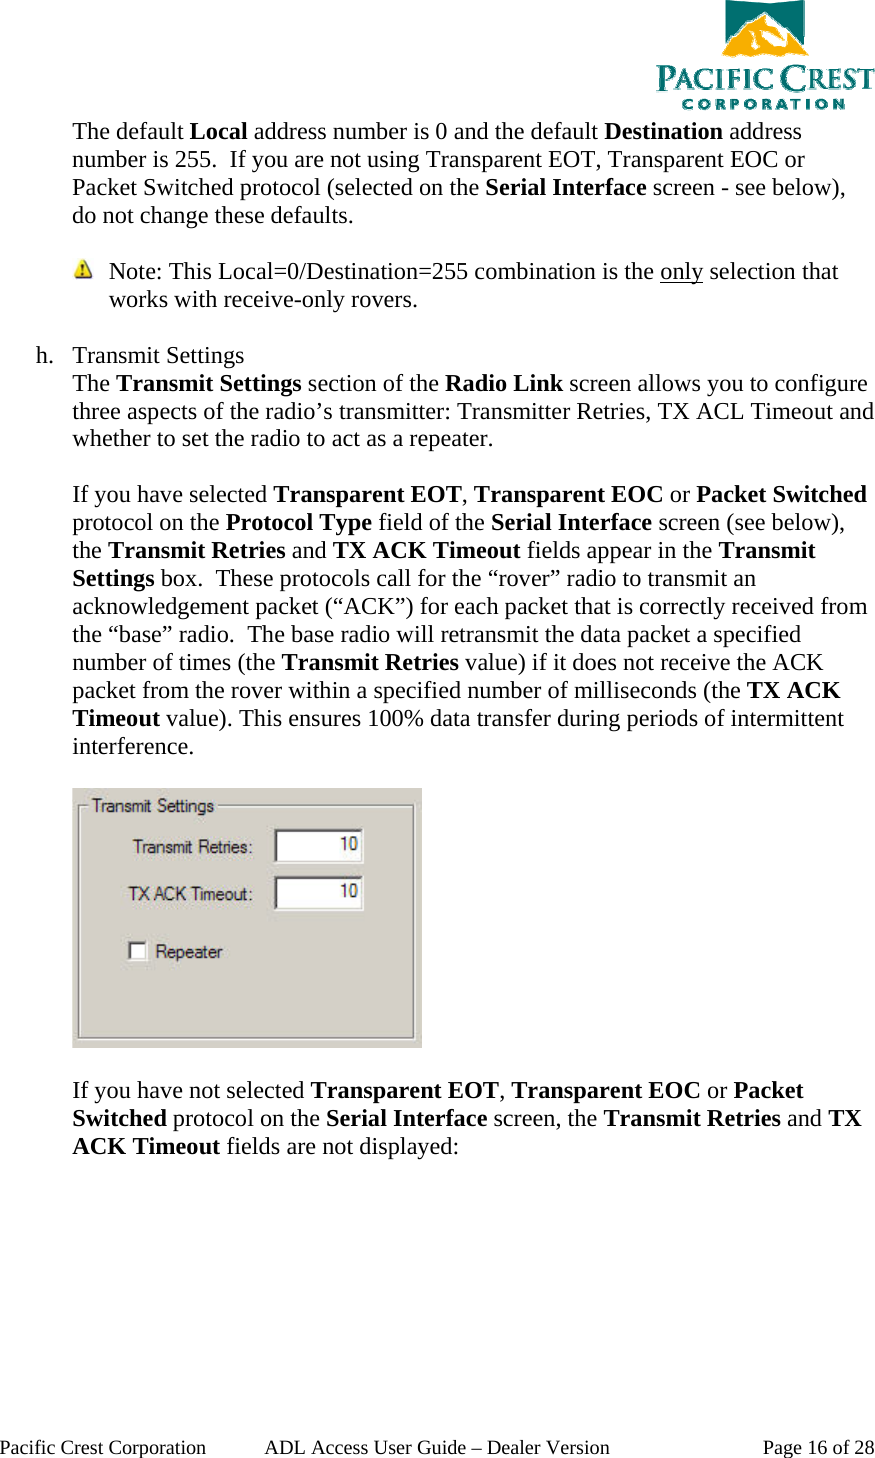  Pacific Crest Corporation  ADL Access User Guide – Dealer Version  Page 16 of 28 The default Local address number is 0 and the default Destination address number is 255.  If you are not using Transparent EOT, Transparent EOC or Packet Switched protocol (selected on the Serial Interface screen - see below), do not change these defaults.    Note: This Local=0/Destination=255 combination is the only selection that works with receive-only rovers.   h. Transmit Settings The Transmit Settings section of the Radio Link screen allows you to configure three aspects of the radio’s transmitter: Transmitter Retries, TX ACL Timeout and whether to set the radio to act as a repeater.  If you have selected Transparent EOT, Transparent EOC or Packet Switched protocol on the Protocol Type field of the Serial Interface screen (see below), the Transmit Retries and TX ACK Timeout fields appear in the Transmit Settings box.  These protocols call for the “rover” radio to transmit an acknowledgement packet (“ACK”) for each packet that is correctly received from the “base” radio.  The base radio will retransmit the data packet a specified number of times (the Transmit Retries value) if it does not receive the ACK packet from the rover within a specified number of milliseconds (the TX ACK Timeout value). This ensures 100% data transfer during periods of intermittent interference.     If you have not selected Transparent EOT, Transparent EOC or Packet Switched protocol on the Serial Interface screen, the Transmit Retries and TX ACK Timeout fields are not displayed: 